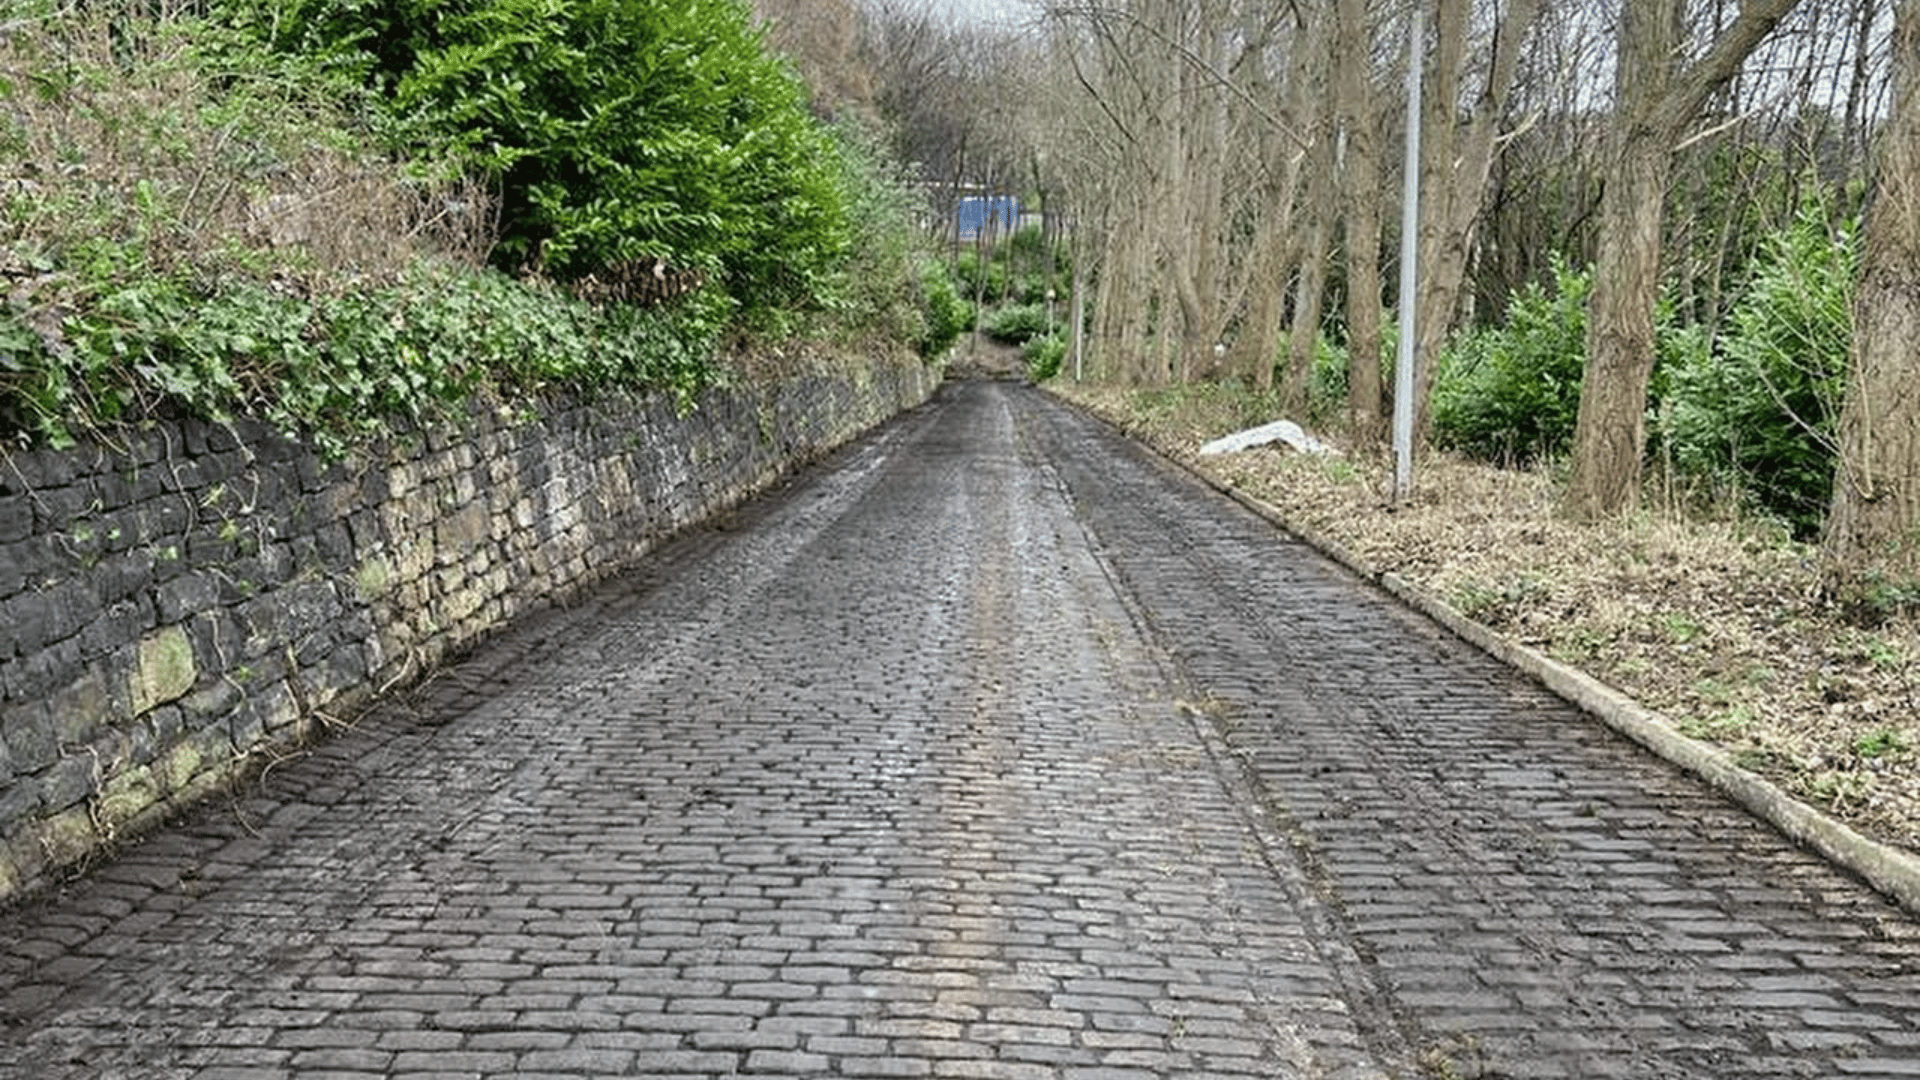 Batlet hub access road cleared and de vegetised, cobbled road and stone walled